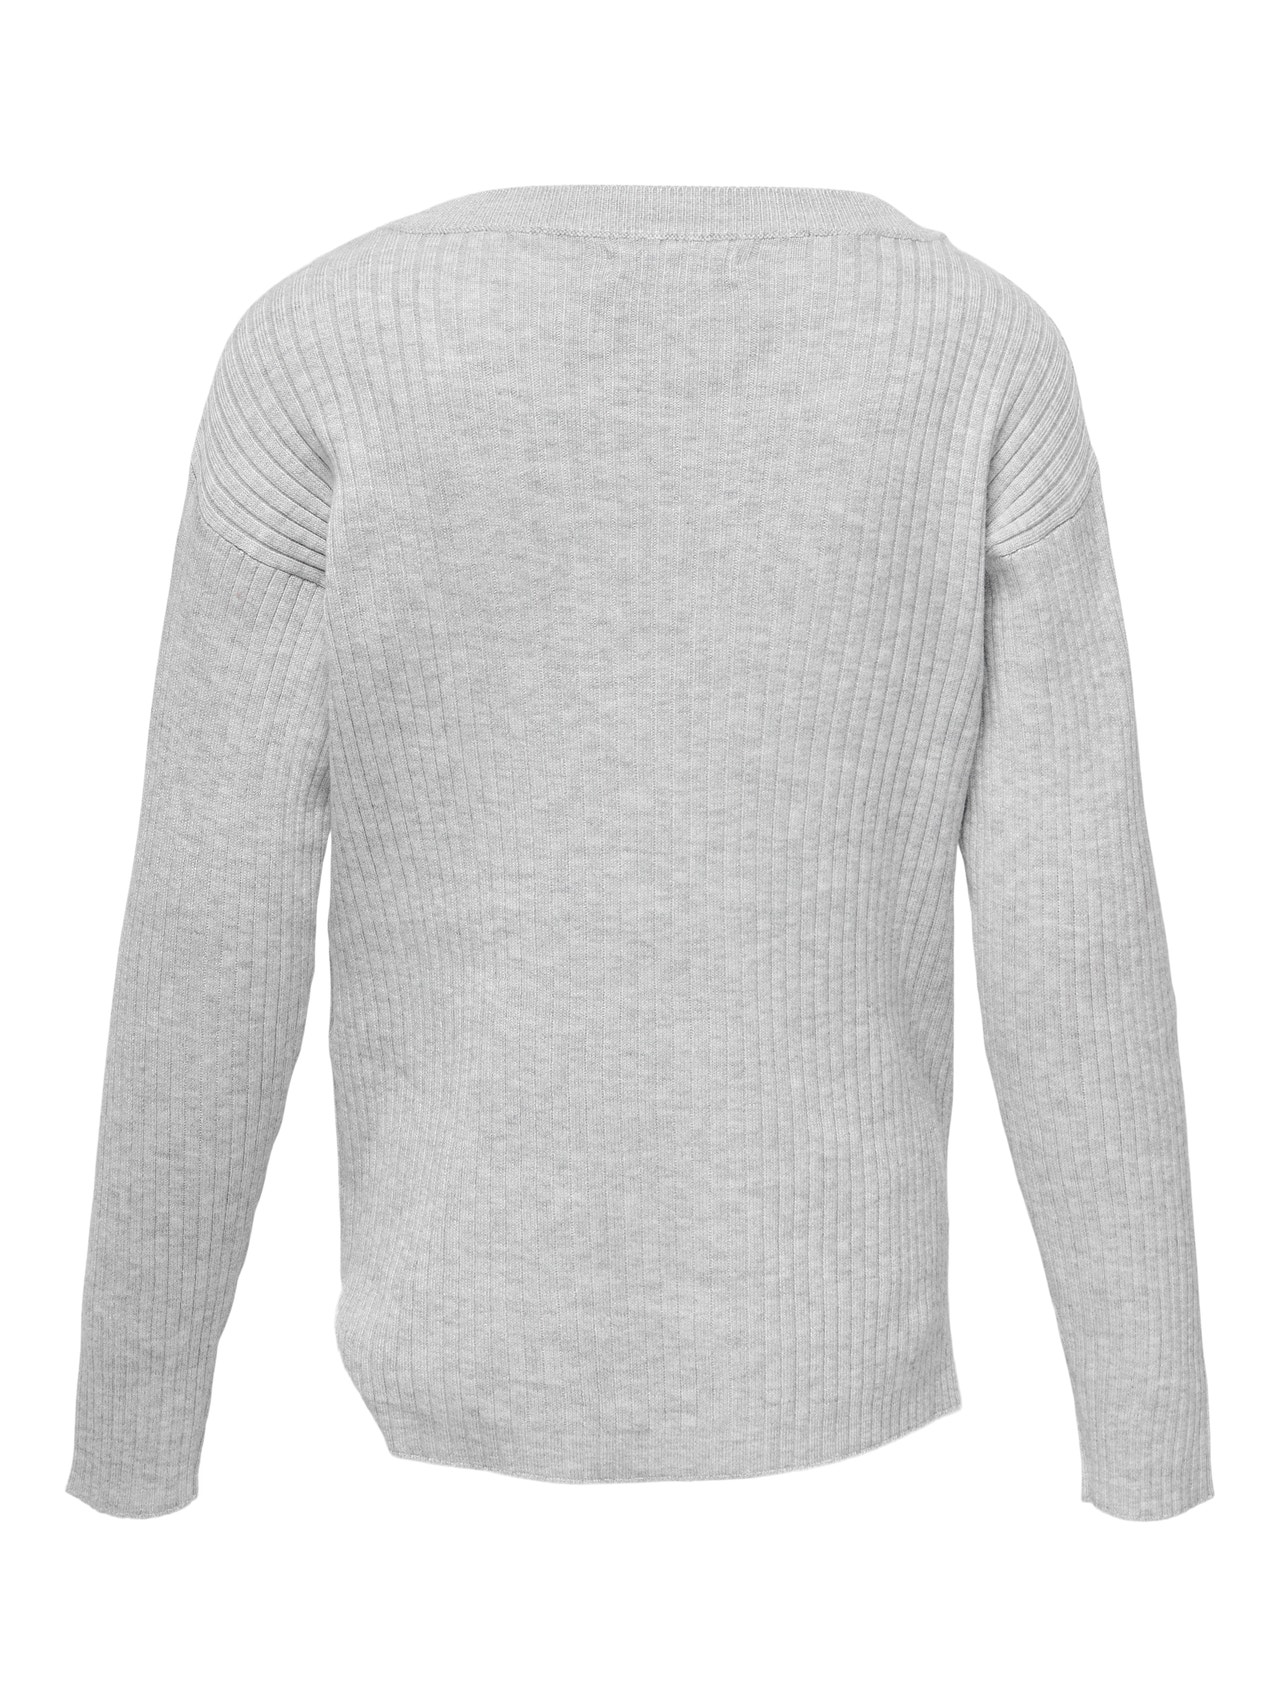 ONLY Solid colored Knitted Pullover -Light Grey Melange - 15263490